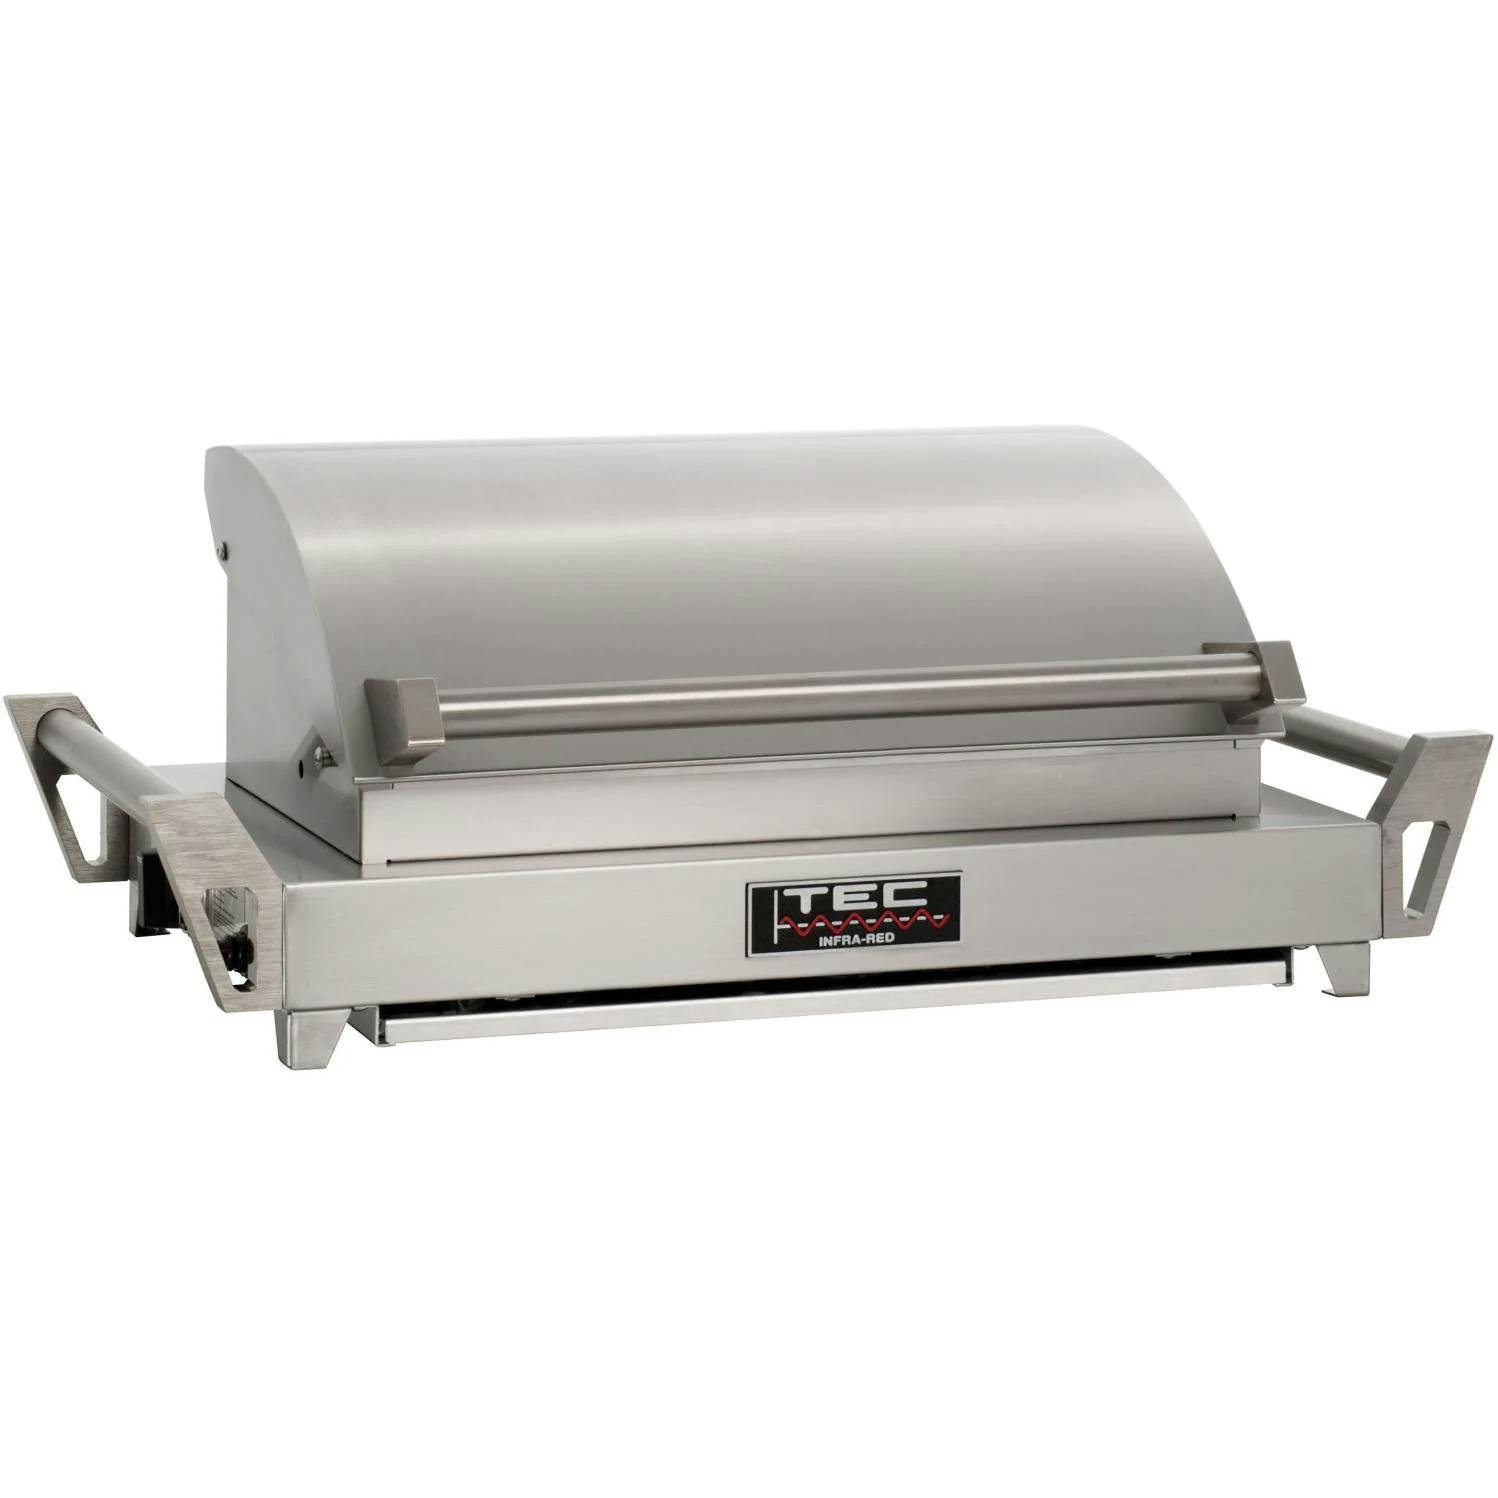 TEC G-Sport FR Portable Infrared Gas Grill · Propane